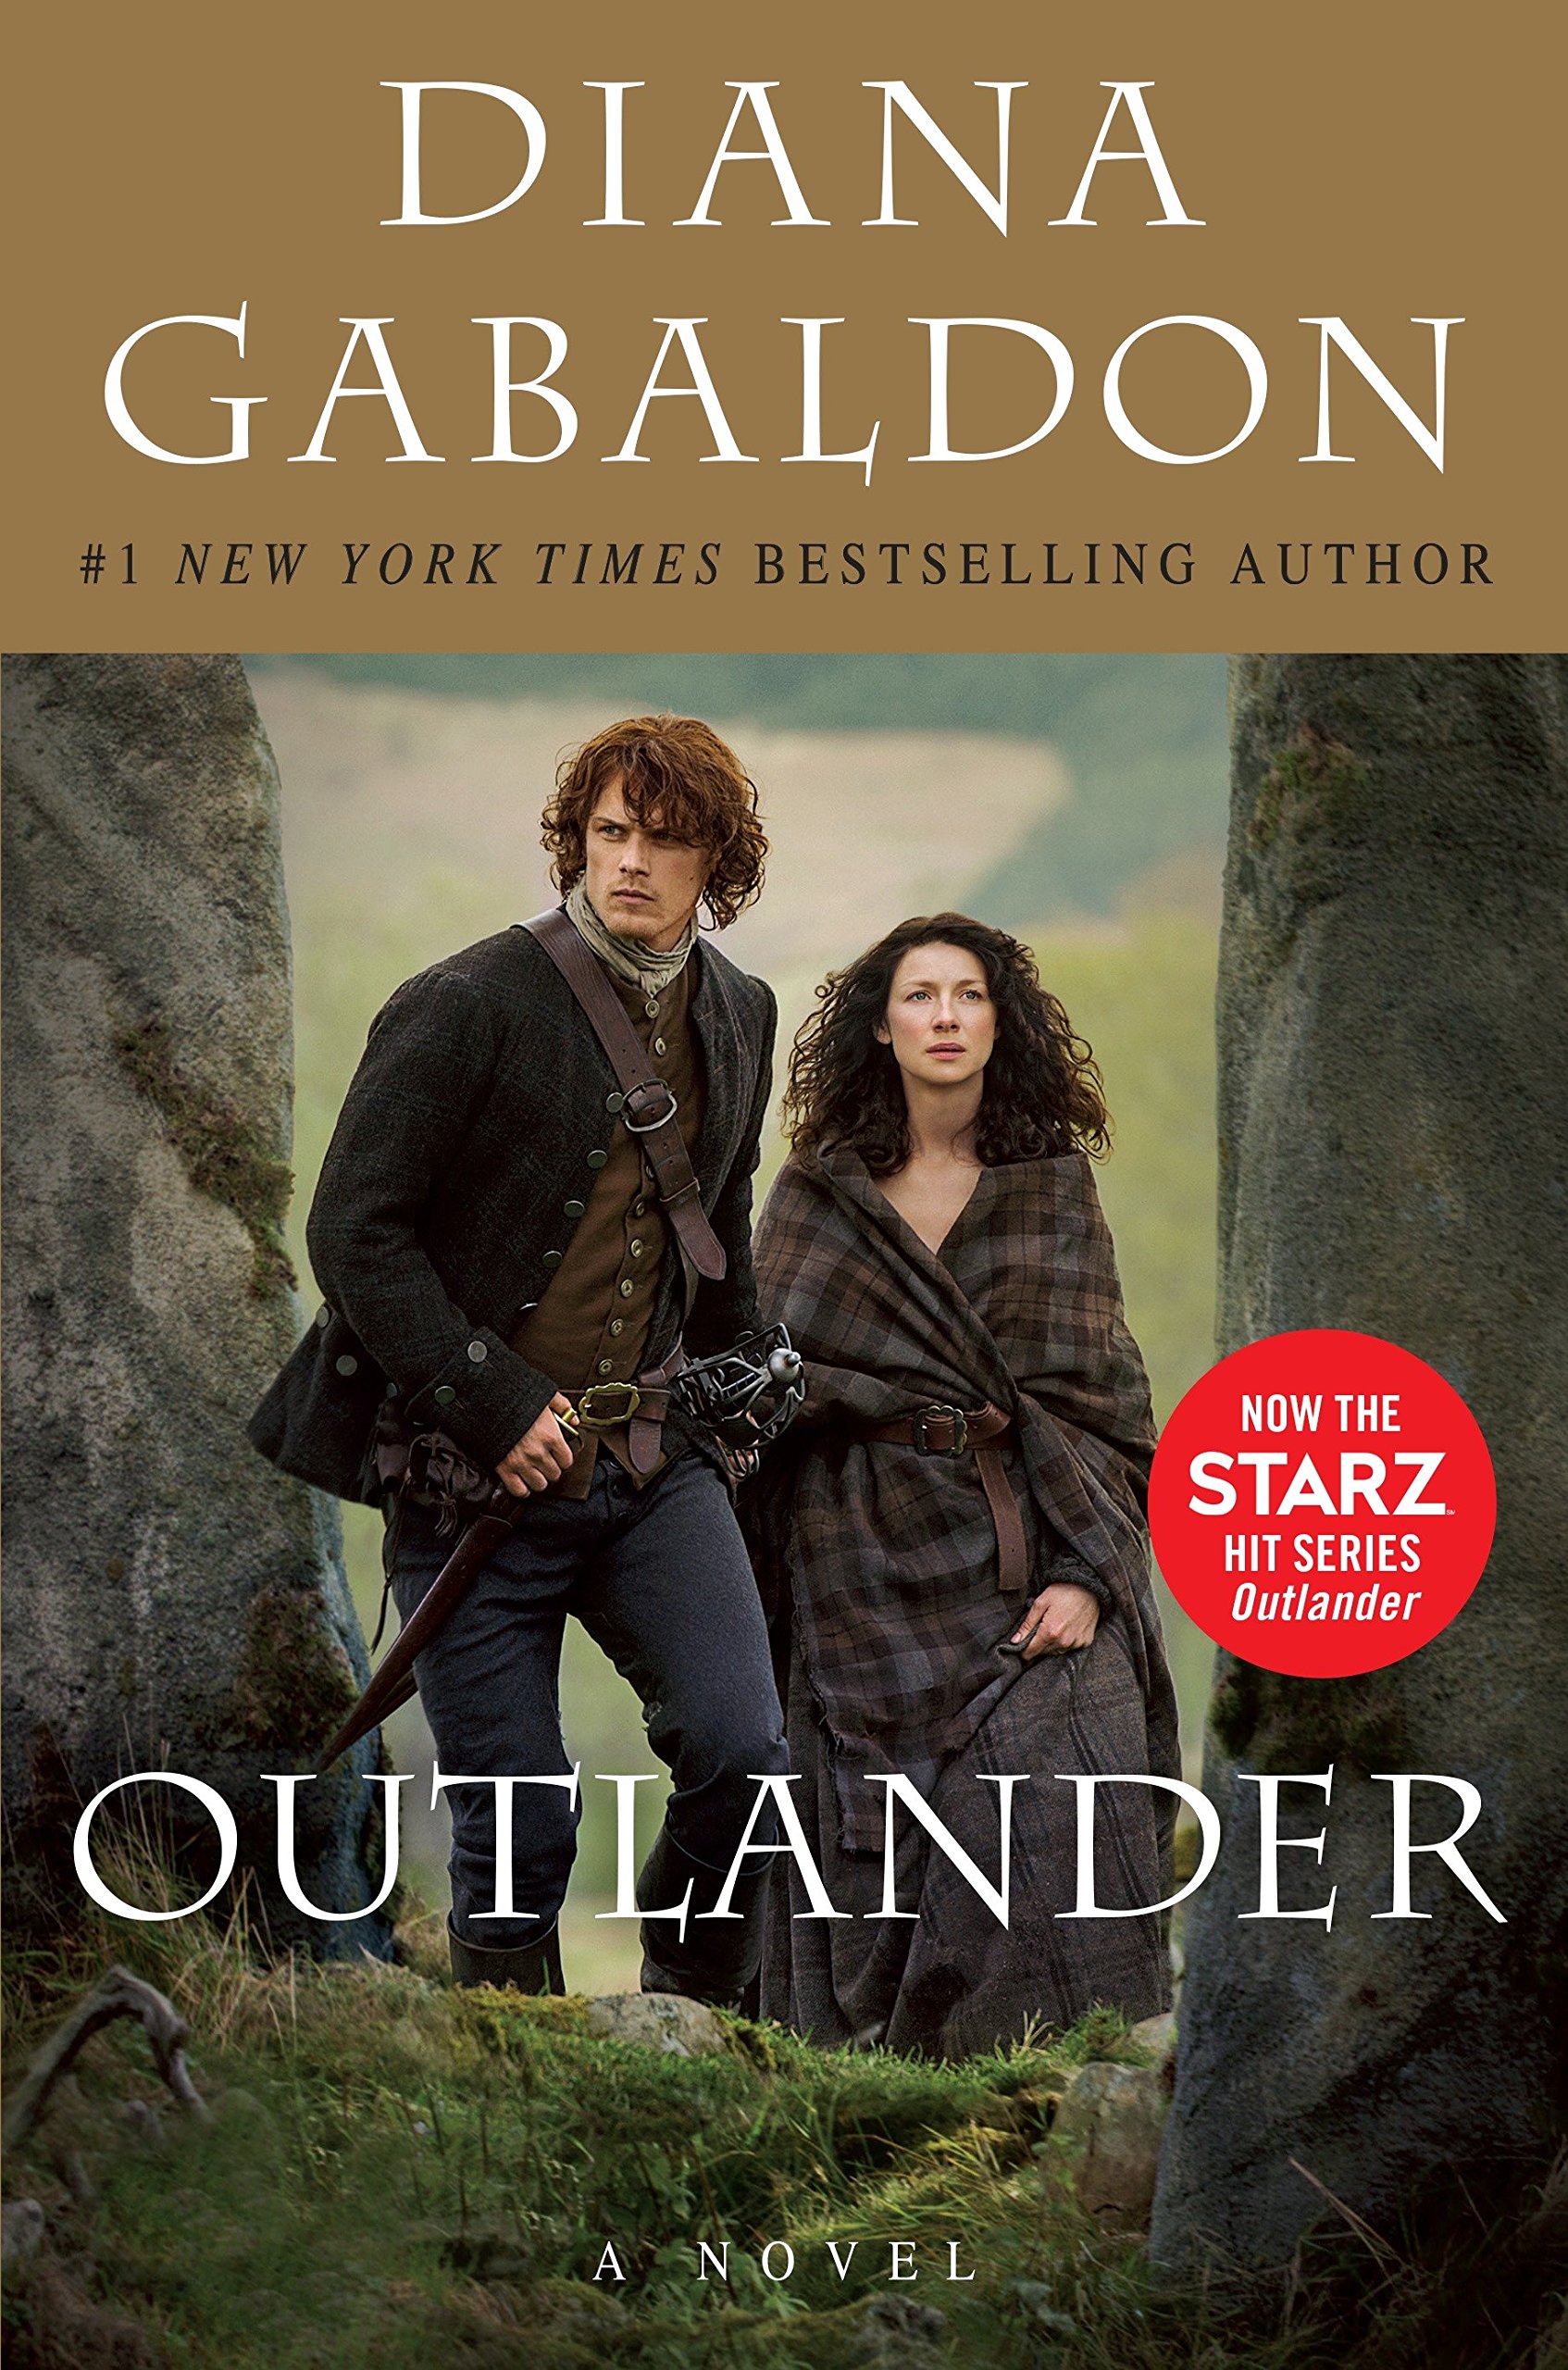 Outlander by Diana Gabaldon cover; man with sword stands in front of woman wearing long cloak